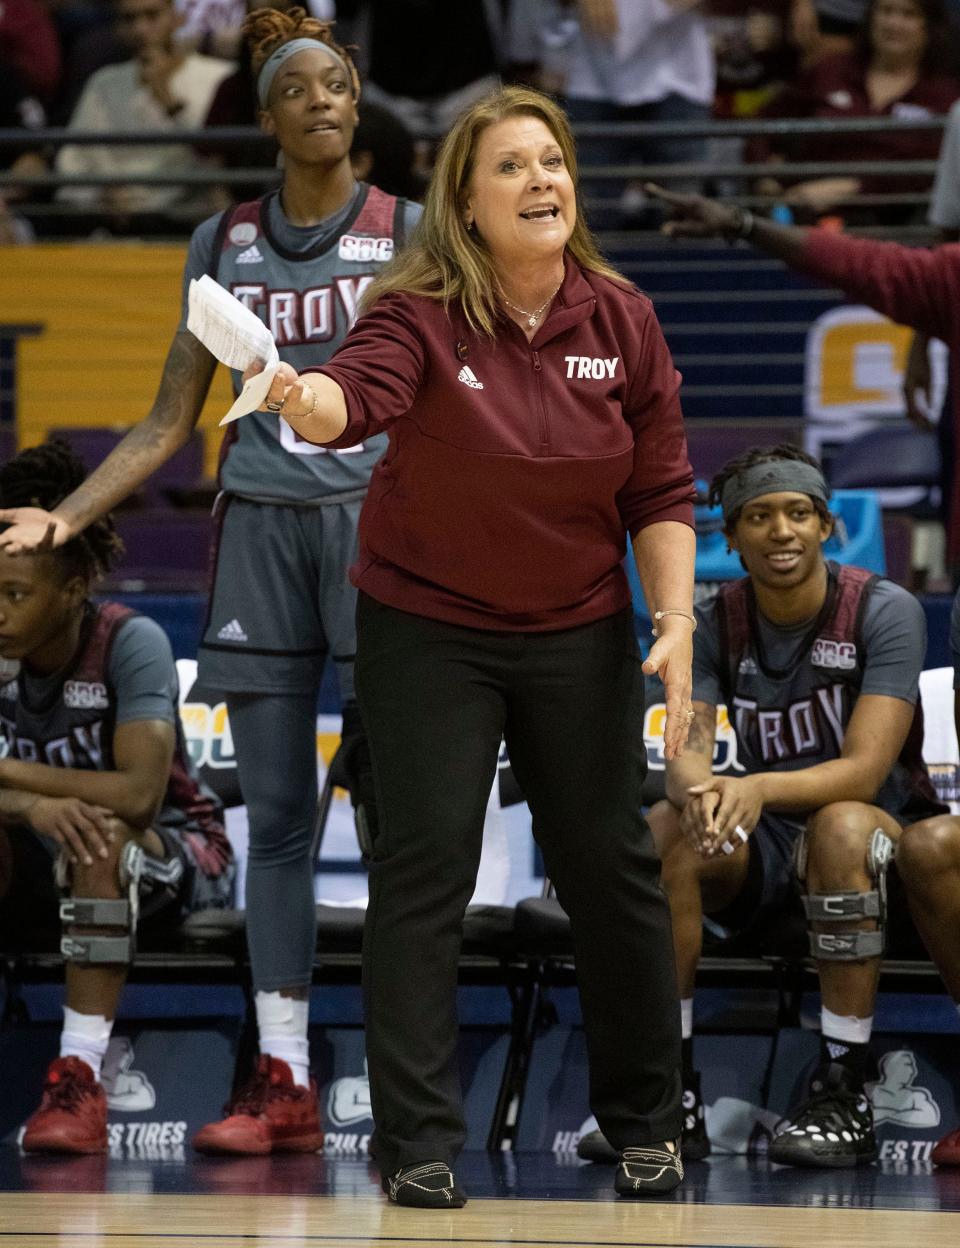 Troy University head women's basketball coach Chanda Rigby offers her players some guidance from the sidelines during the Sunbelt Conference Women's Championship game on Monday, March 7, 2022. Troy lost to the University of Texas Arlington. 76-61. 